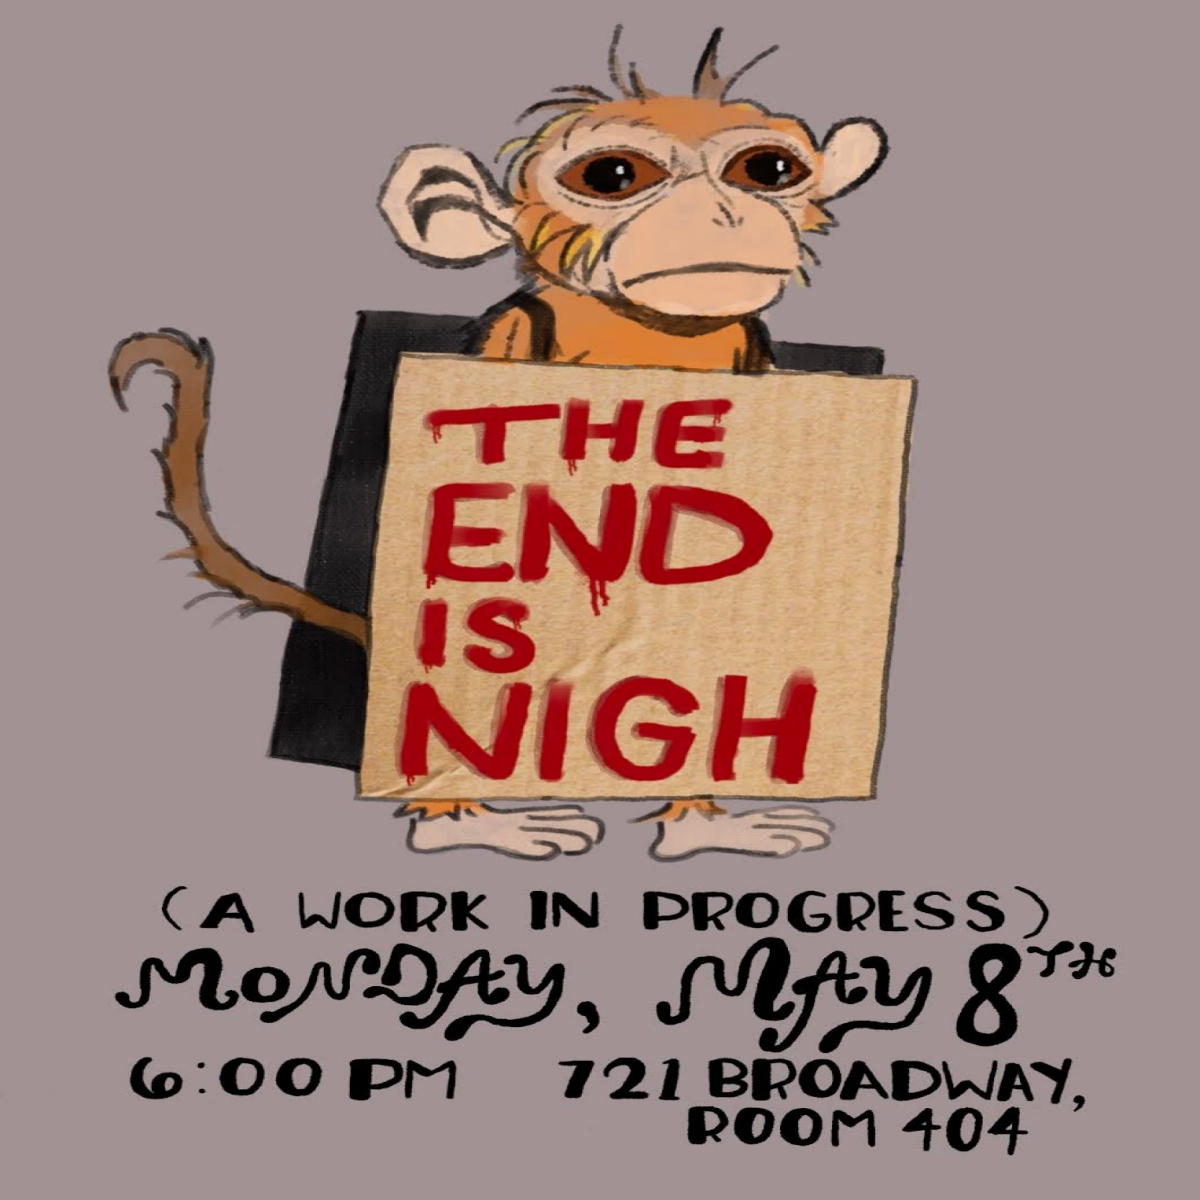 The End is Nigh Flyer